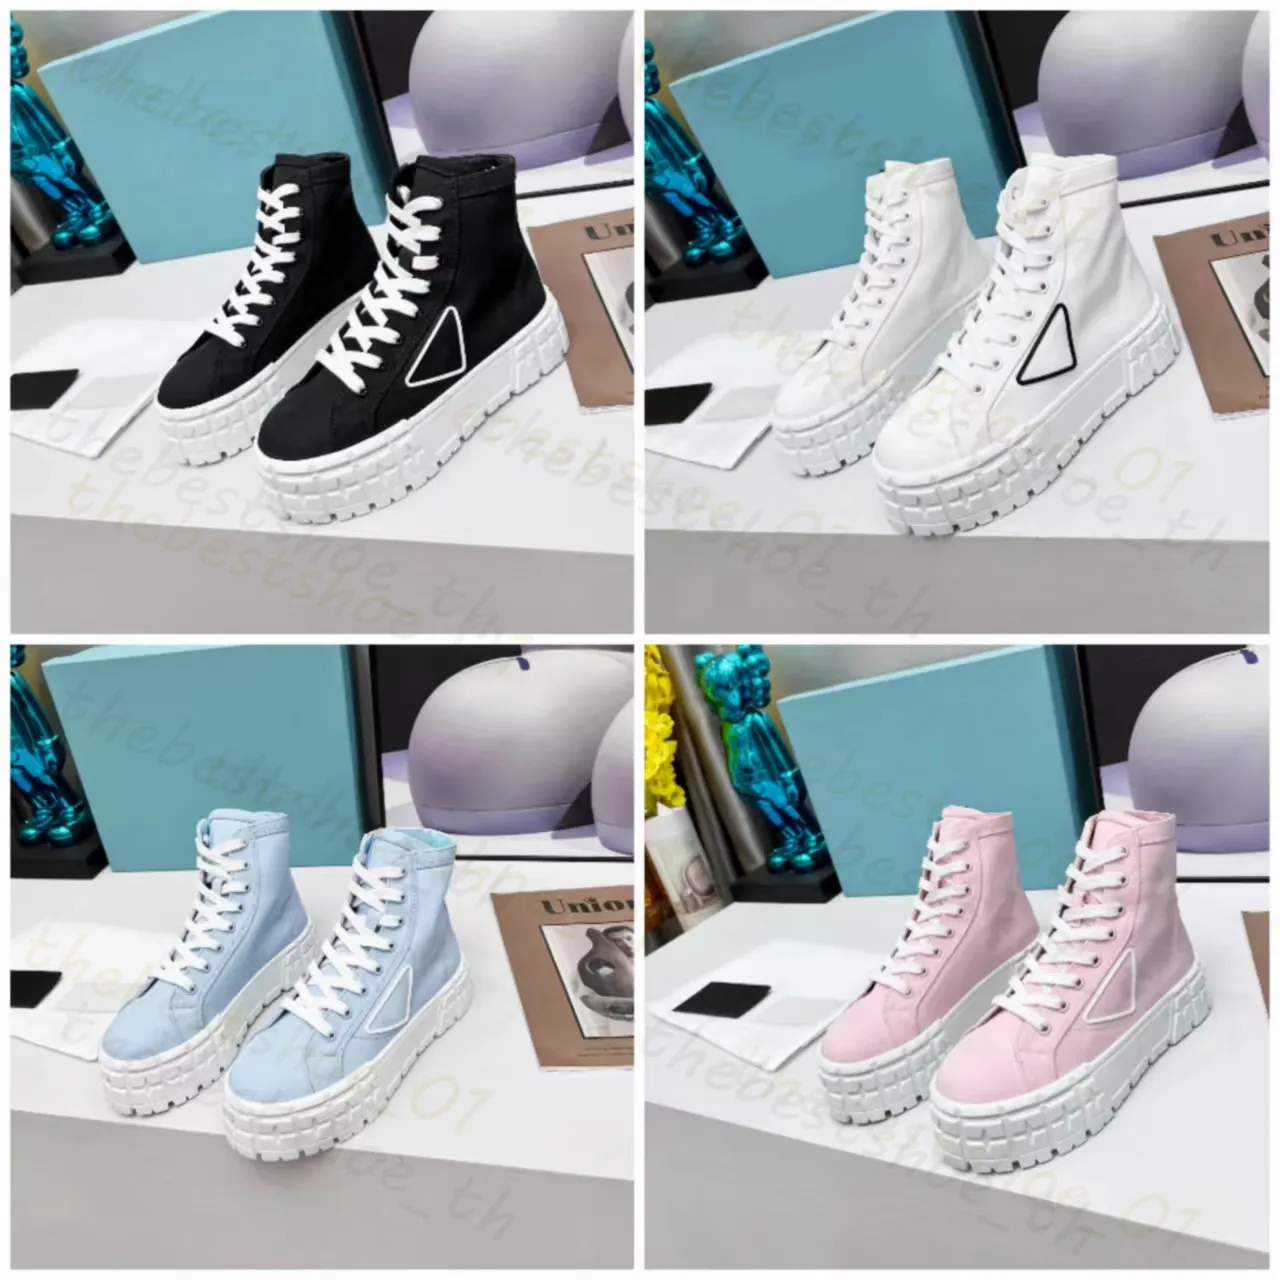 Designer Casual Shoes Women Nylon Wheel Sneakers Gabardine Fashion Canvas Brand Ladies Stylist Sneakers Fashion Thick Sole Solid Color Height Boosting Shoes